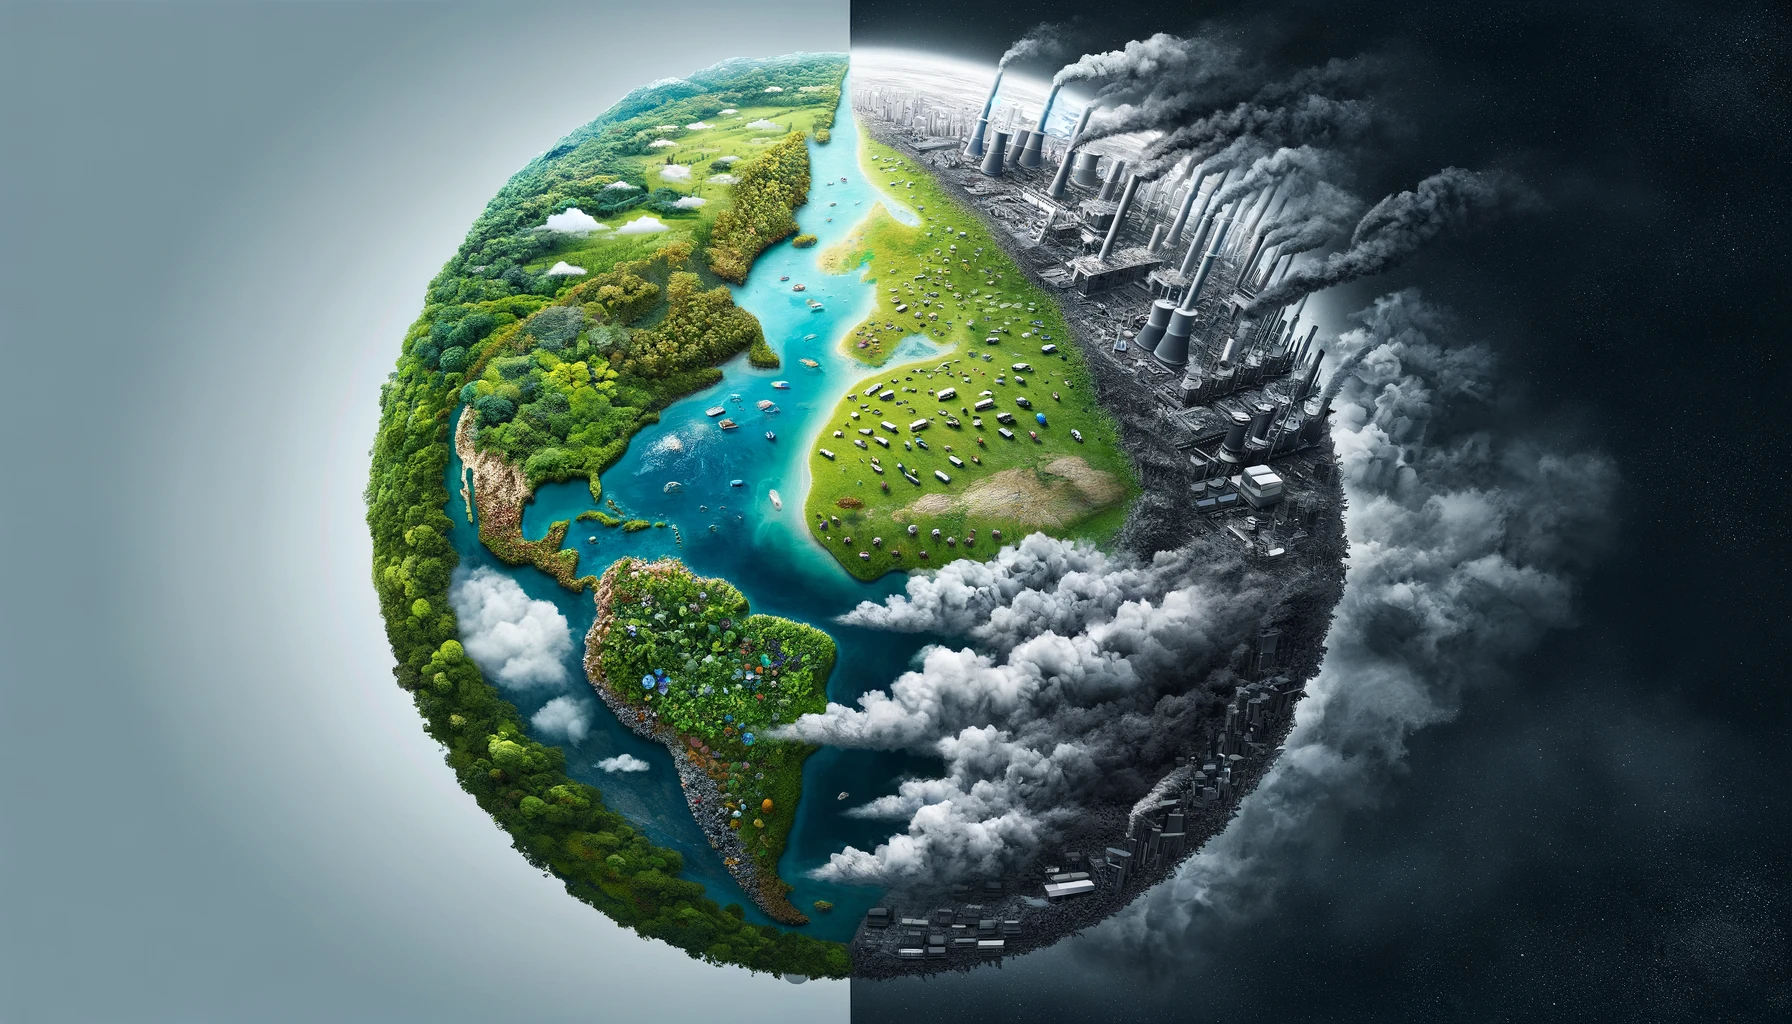 An image of the earth vividly illustrating the contrast between the vibrant, green half symbolising genuine environmental efforts and the grey, polluted half depicting the concept of greenwashing.